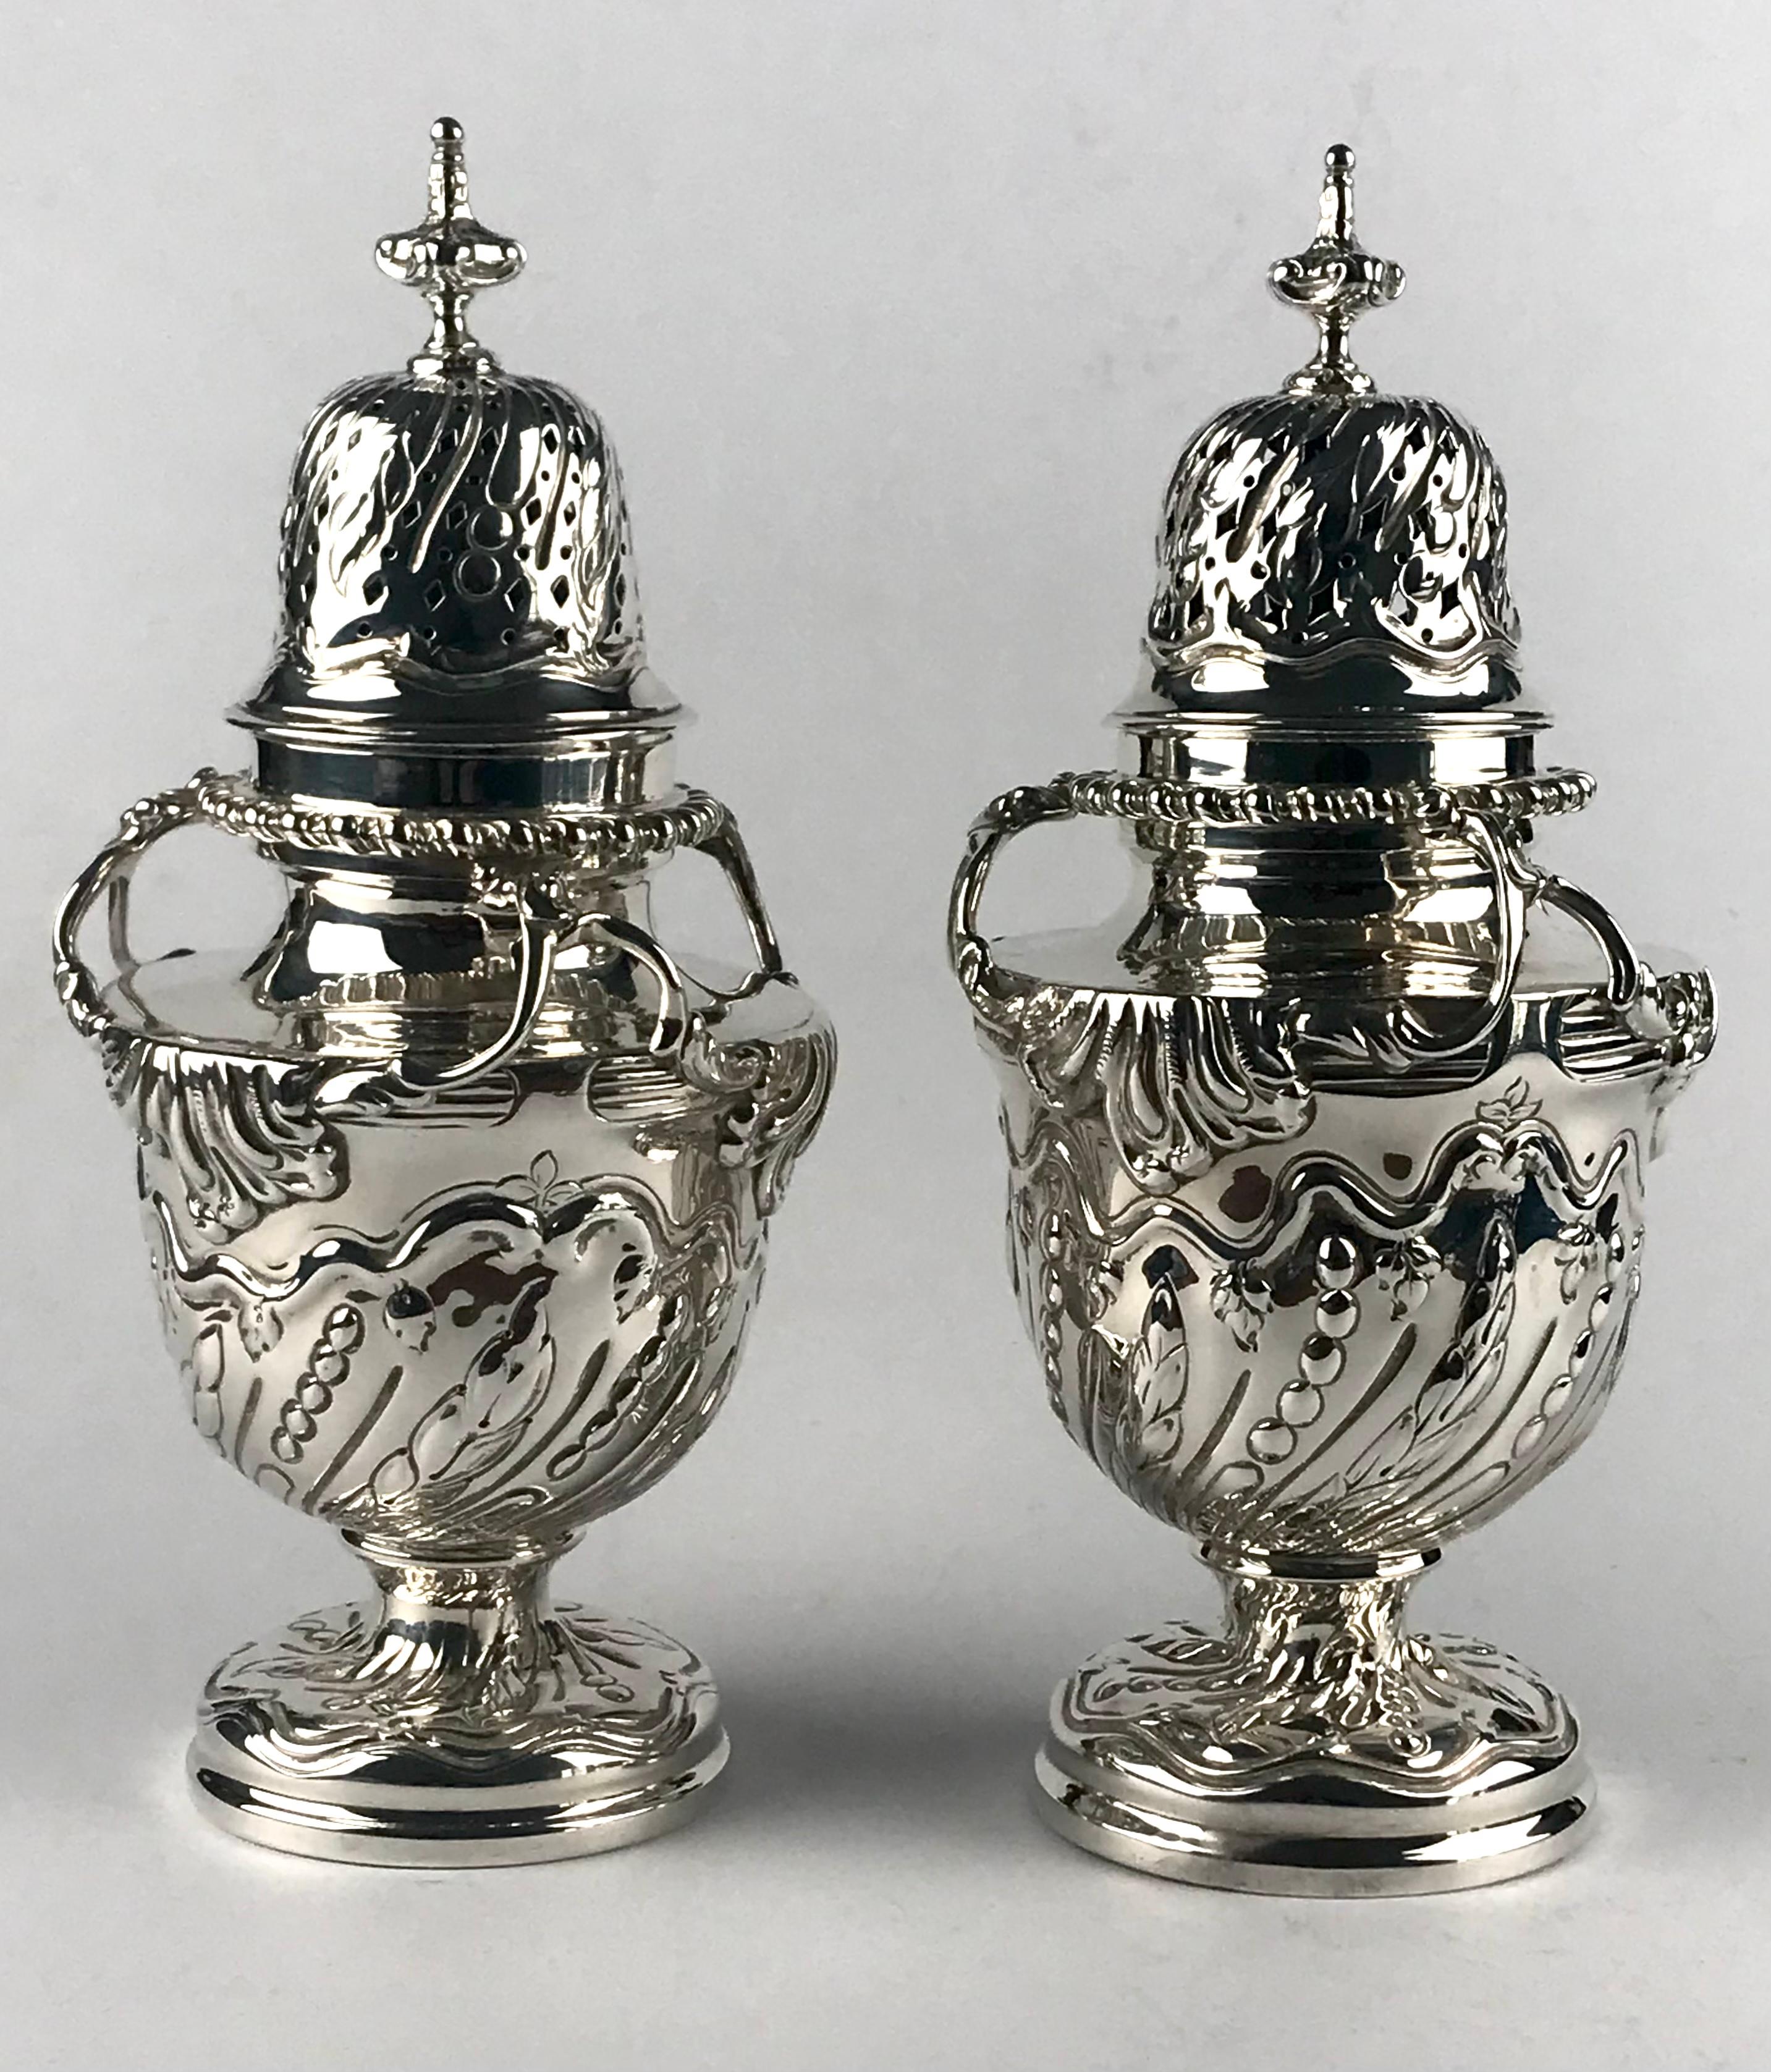 Magnificent Solid Silver Sterling Victorian Pair Sugar Casters Shakers 910g 1